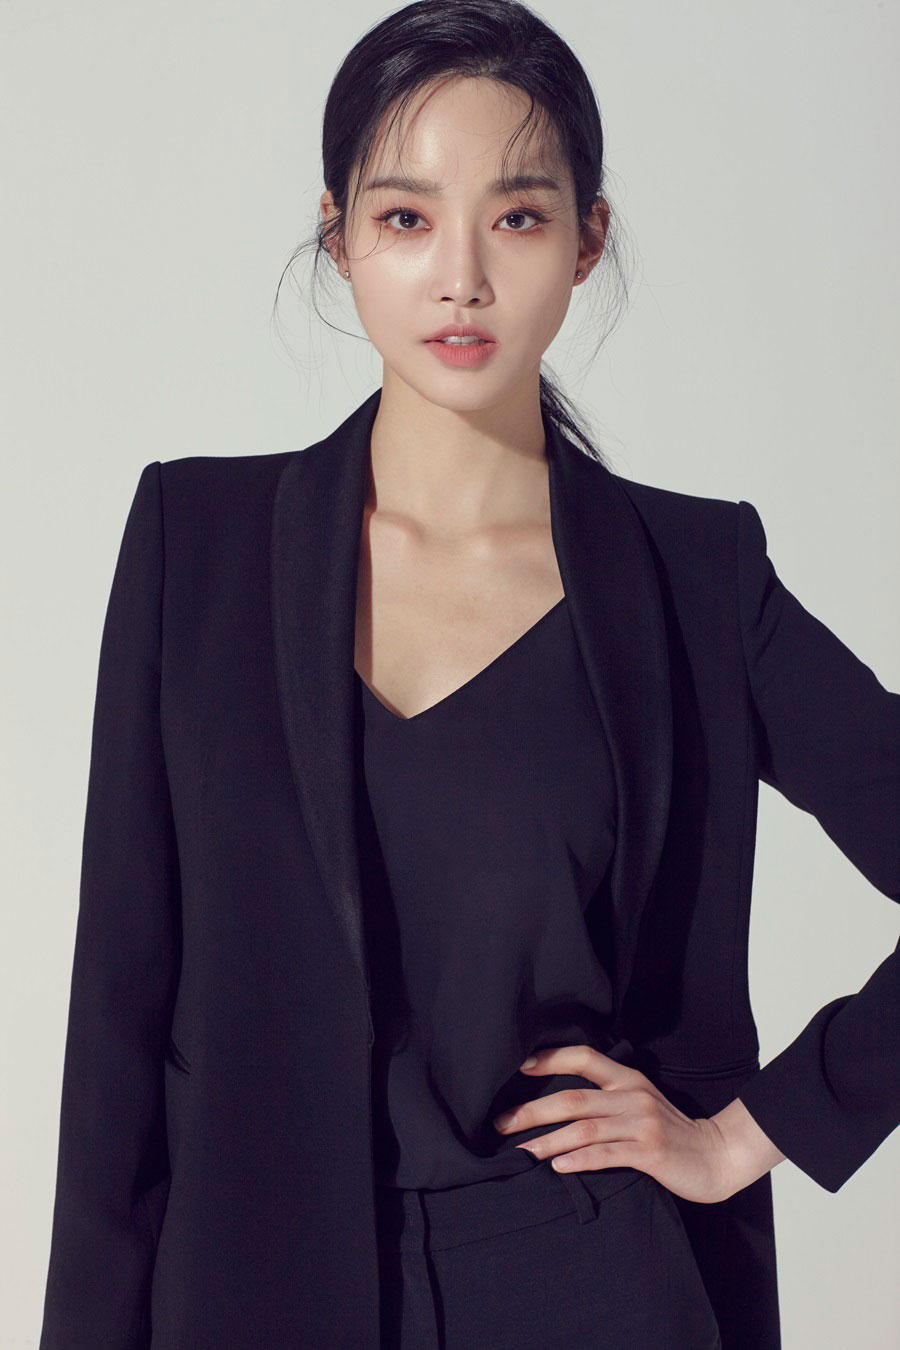 In 2012, actress Yu-mi Kim, who is from Miss Korea Jin (), unveiled a profile featuring a new atmosphere.On November 11, the company In Company released a new profile photo of Yu-mi Kims various colors.Yu-mi Kim captivated Eye-catching by revealing the deepening charm from the natural appearance of a pure atmosphere to the chic and intense image according to the changing costumes and makeup in this profile shooting which was conducted with three concepts in total.Yu-mi Kim in the public photo is showing off a neat atmosphere with a simple makeup, Supernatural hair, jeans and a simple T-shirt.Especially, the natural charm that comes from a bright expression makes the beautiful look more flawless and attracts Eye-catching.In the second concept, which matches ivory knit and navy pants, soft wave hair creates a contradictory atmosphere with feminine yet casual charm.It adds a relaxed smile to urban and casual styling, certifying deepened eyes and watery beautiful looks, and has attracted various concepts.On this day, Yu-mi Kim is the back door that focused attention on his relaxed appearance despite his long-time shooting.It is a professional aspect with a look and gesture that fits various concepts, and it has launched a full-scale resumption signal through a profile that shows deeper emotions.Yu-mi Kim, who showed the charm of Fairy pitta with mature image and atmosphere through this profile picture, hopes to see what kind of activities he will do in the future.On the other hand, Yu-mi Kim will show up to the public through various activities with the release of the new profile.Photos/In-Company